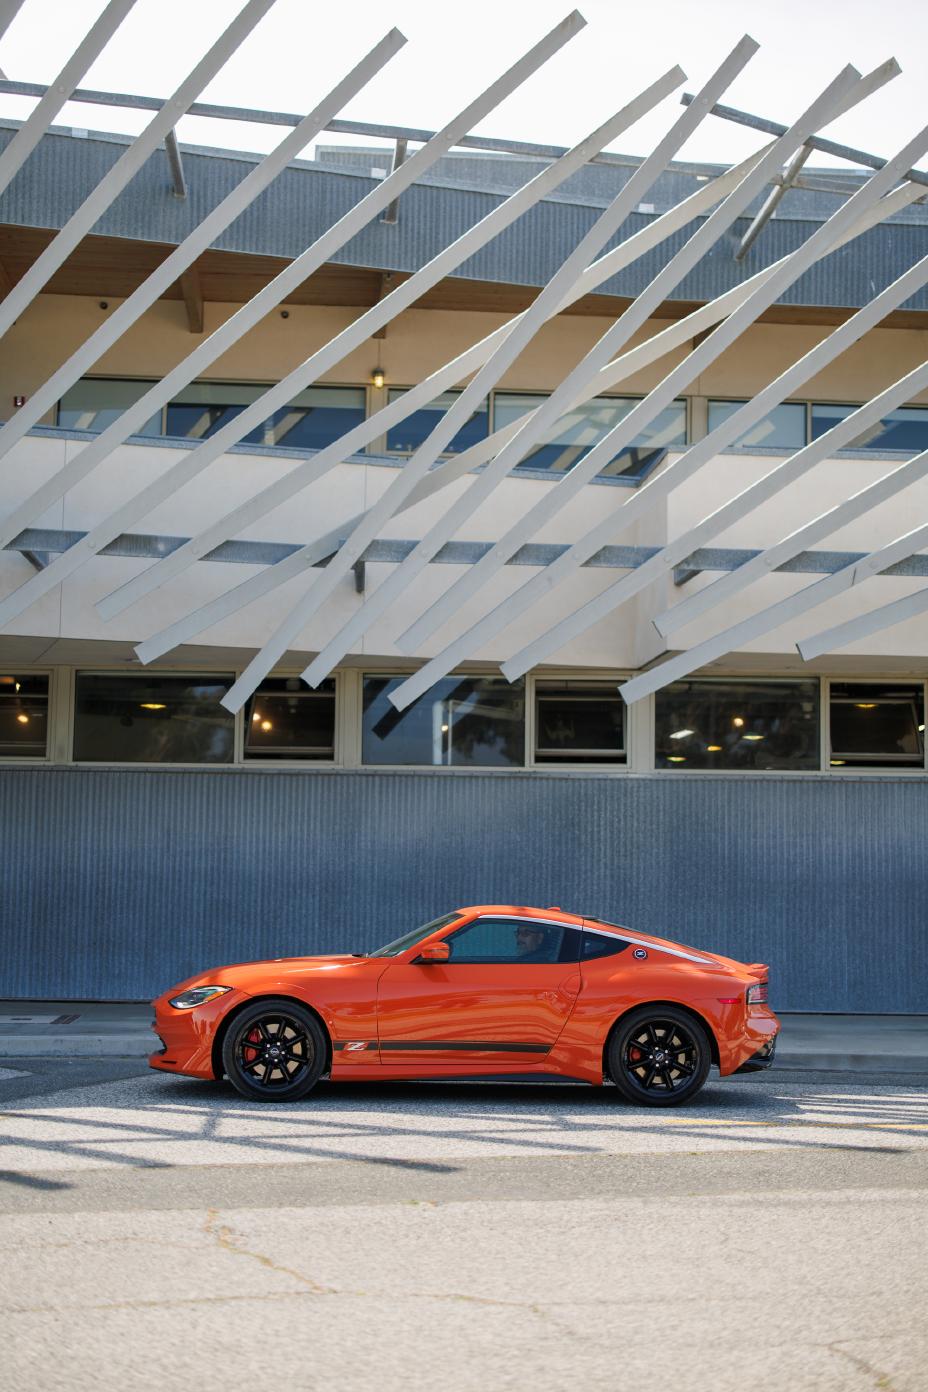 Profile of orange Z Nissan Heritage Edition with a building in the background